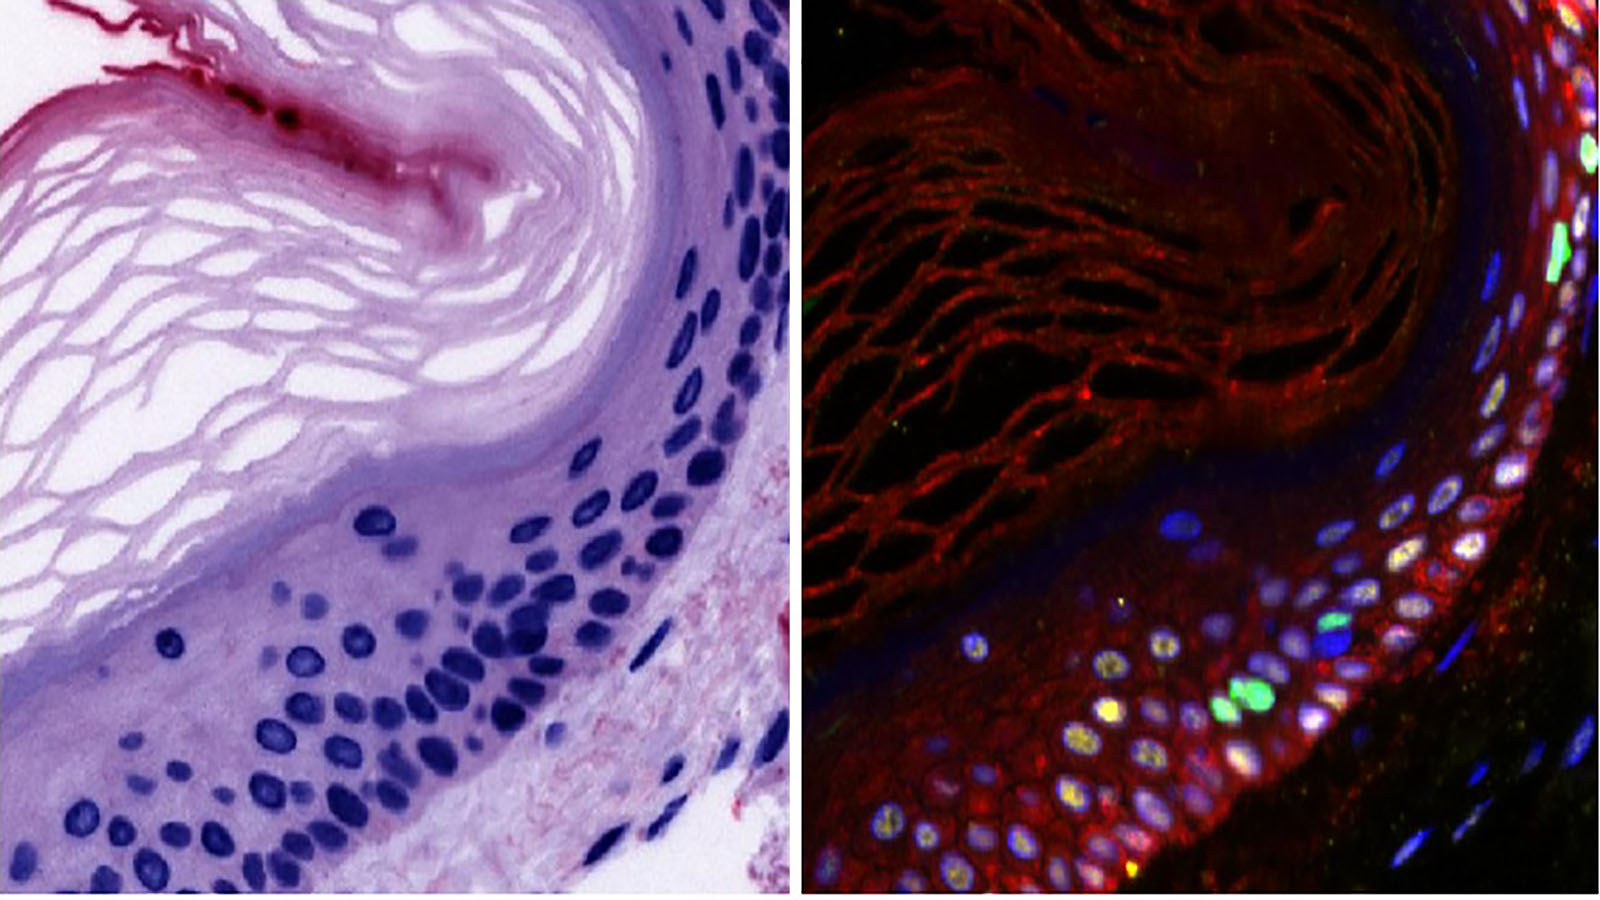 H&E and Cell Dive images of epidermis from Dr. Fiona Ginty at GE Research